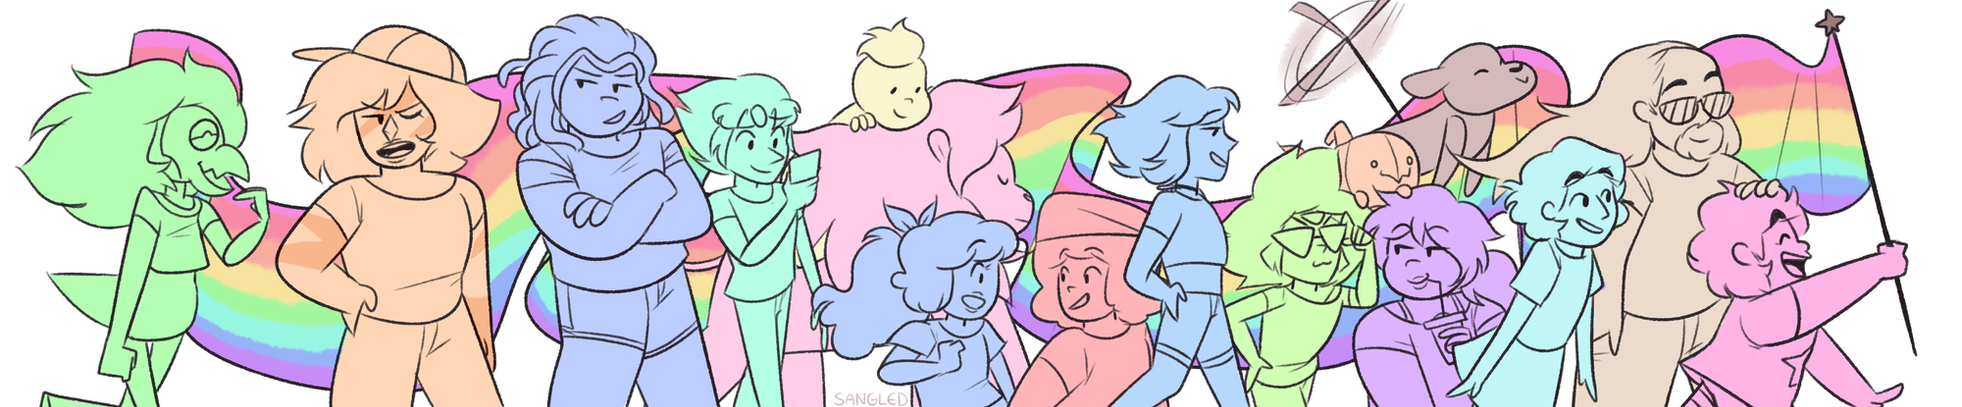 as requested, the final frame from my 'everyone is gay' animatic! very very long, as you can see. animatic: www.youtube.com/watch?v=wJ27WJ…